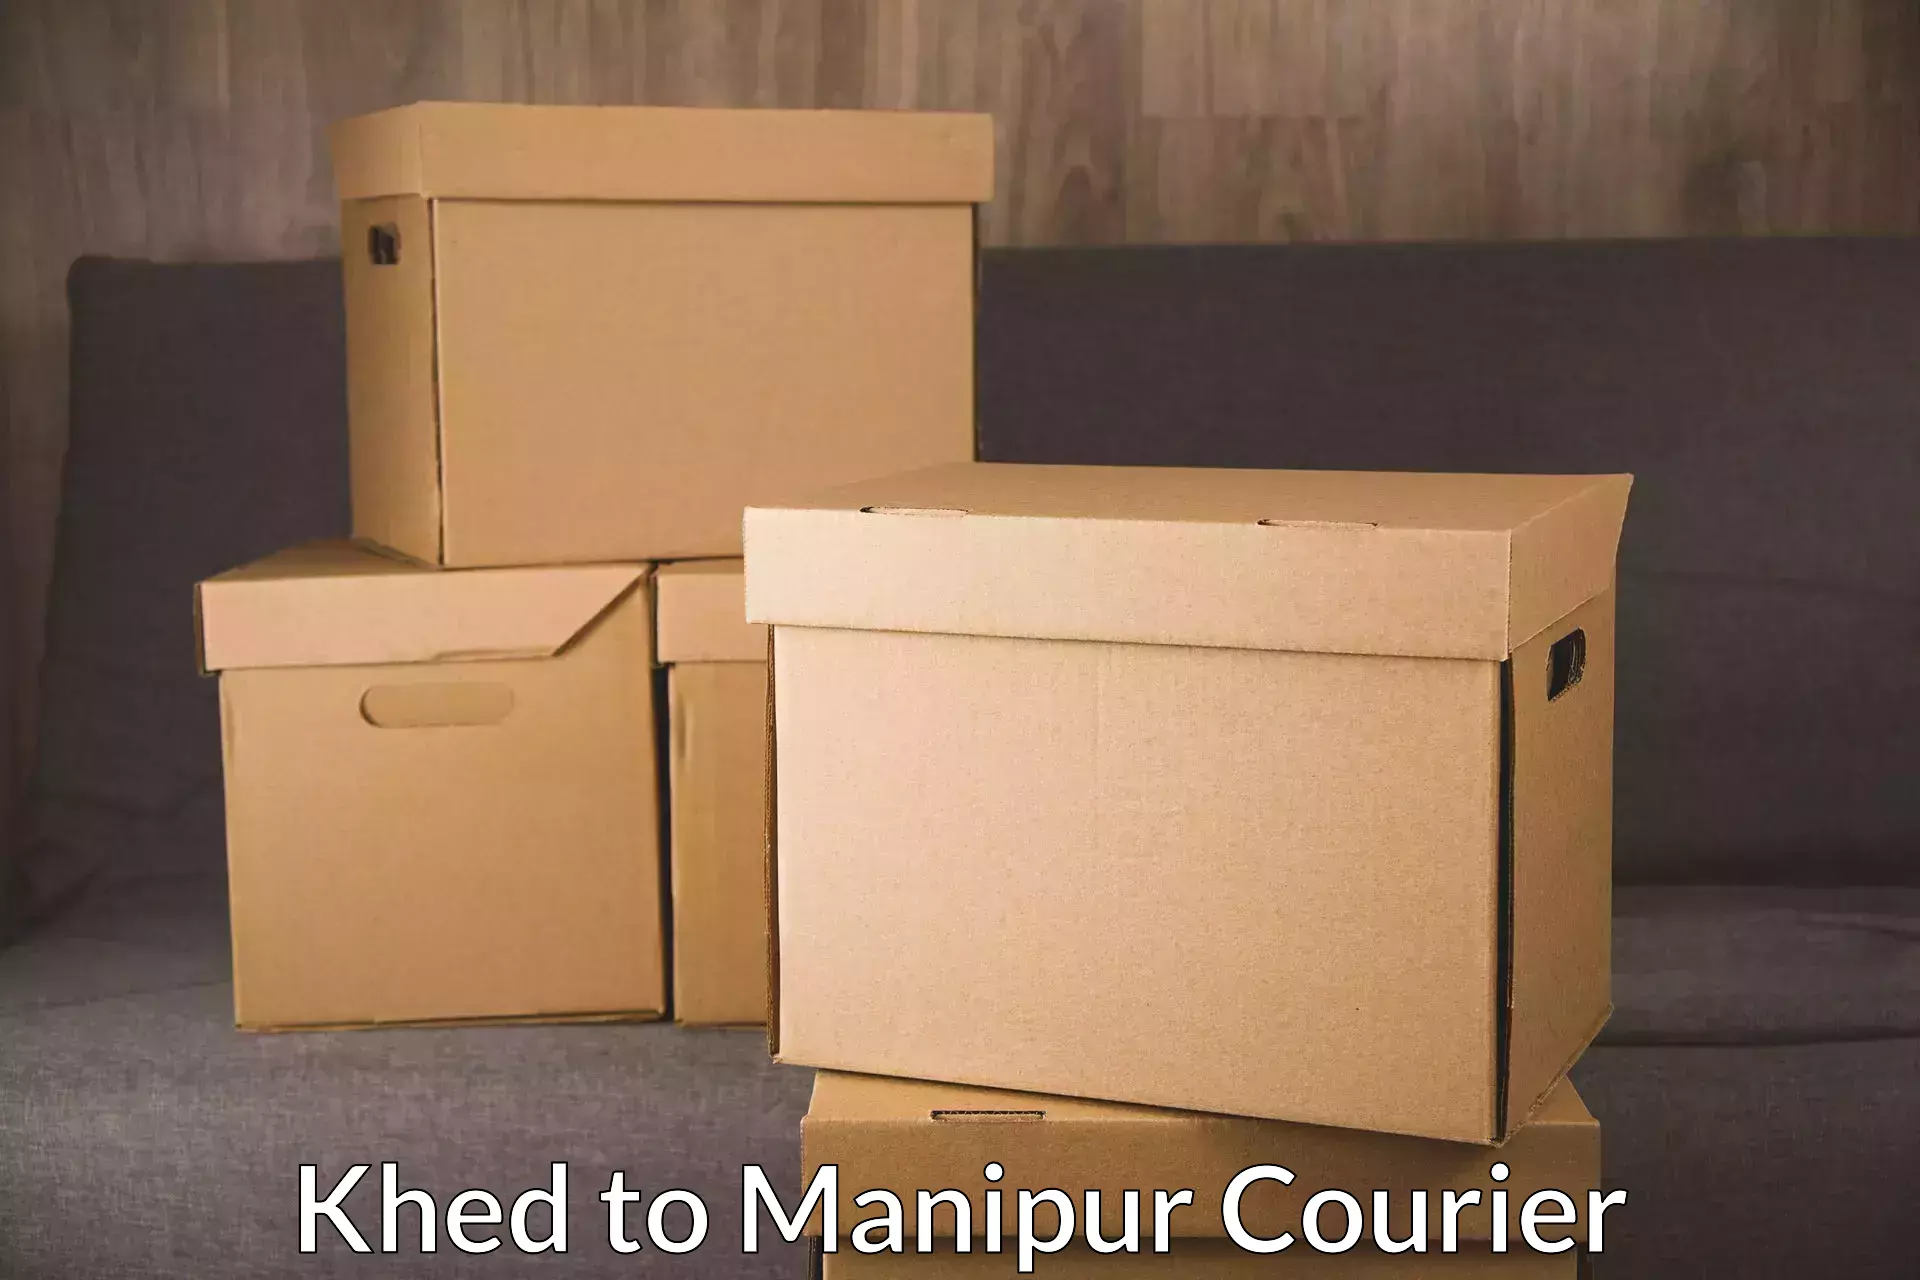 State-of-the-art courier technology Khed to Kanti